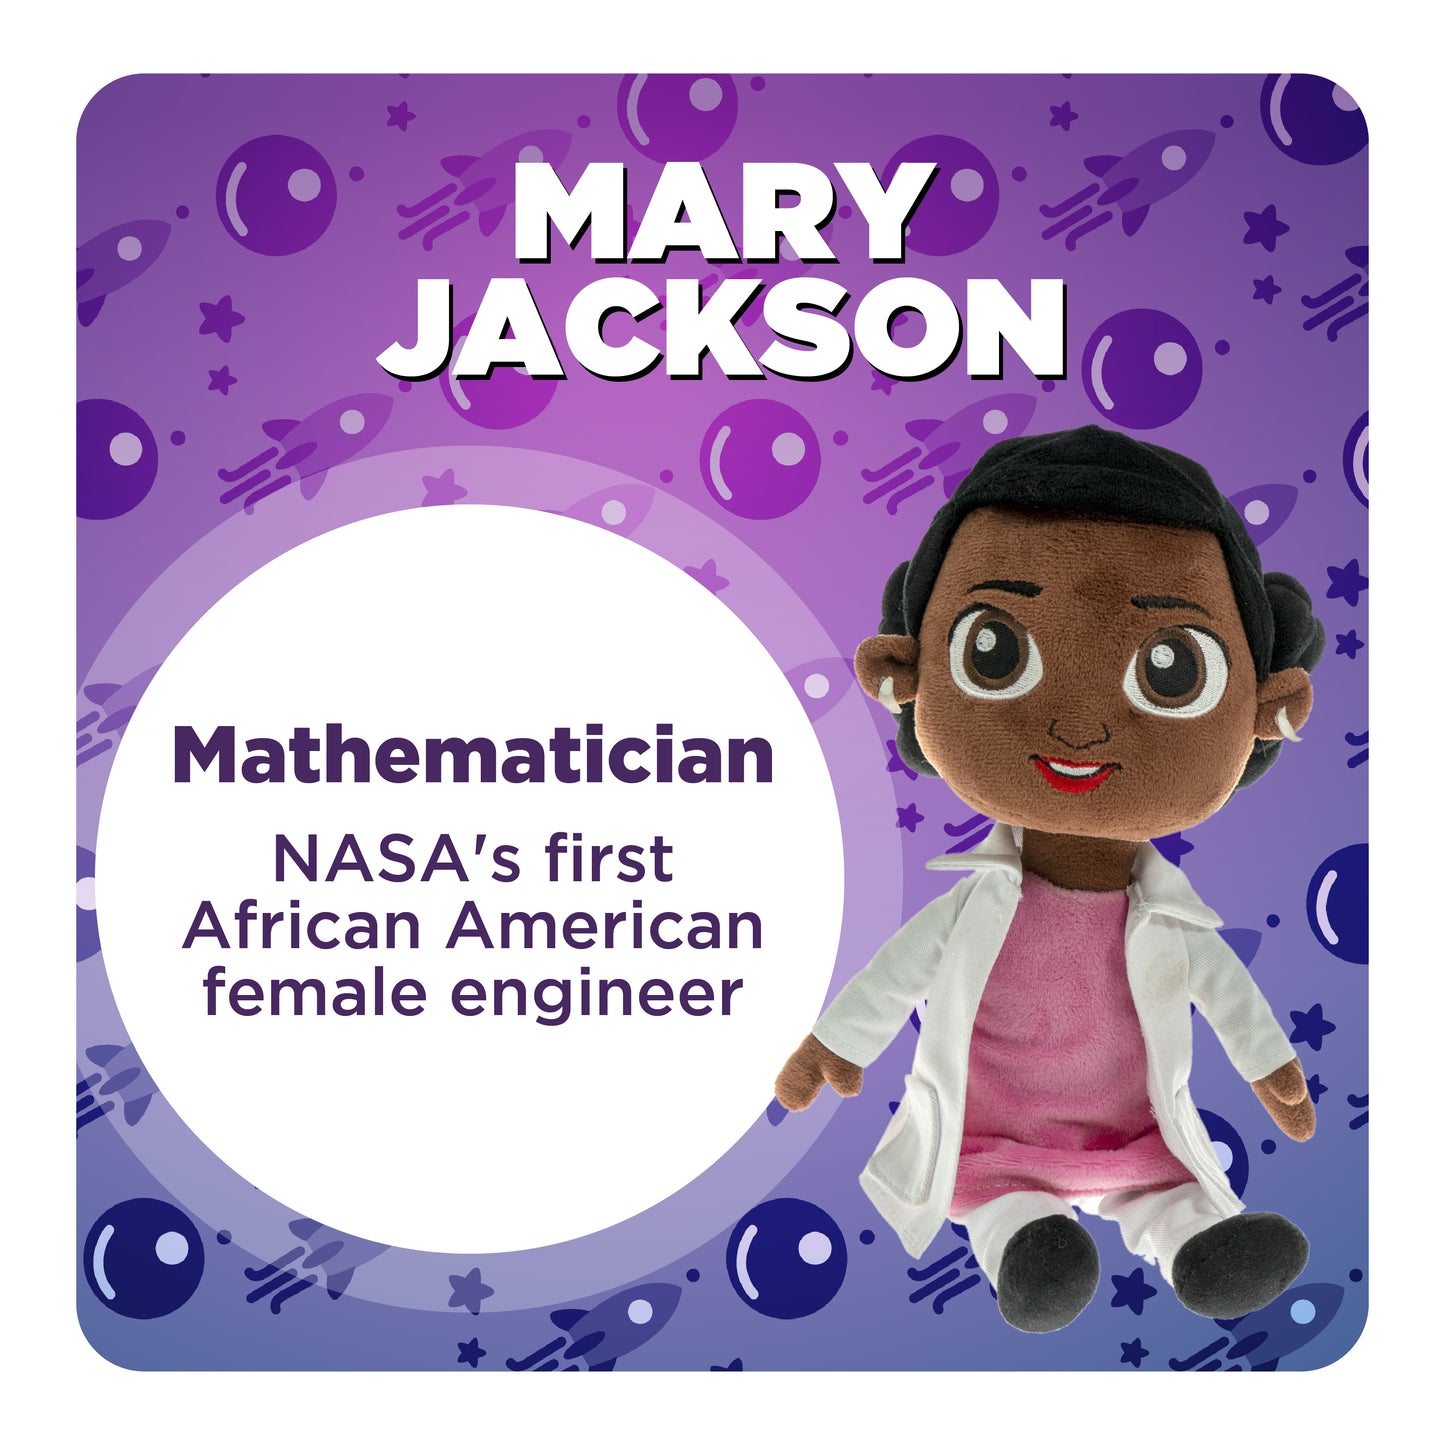 Explore the Stars with Mary Jackson: The Interactive Plush Companion for Learning and Playtime!